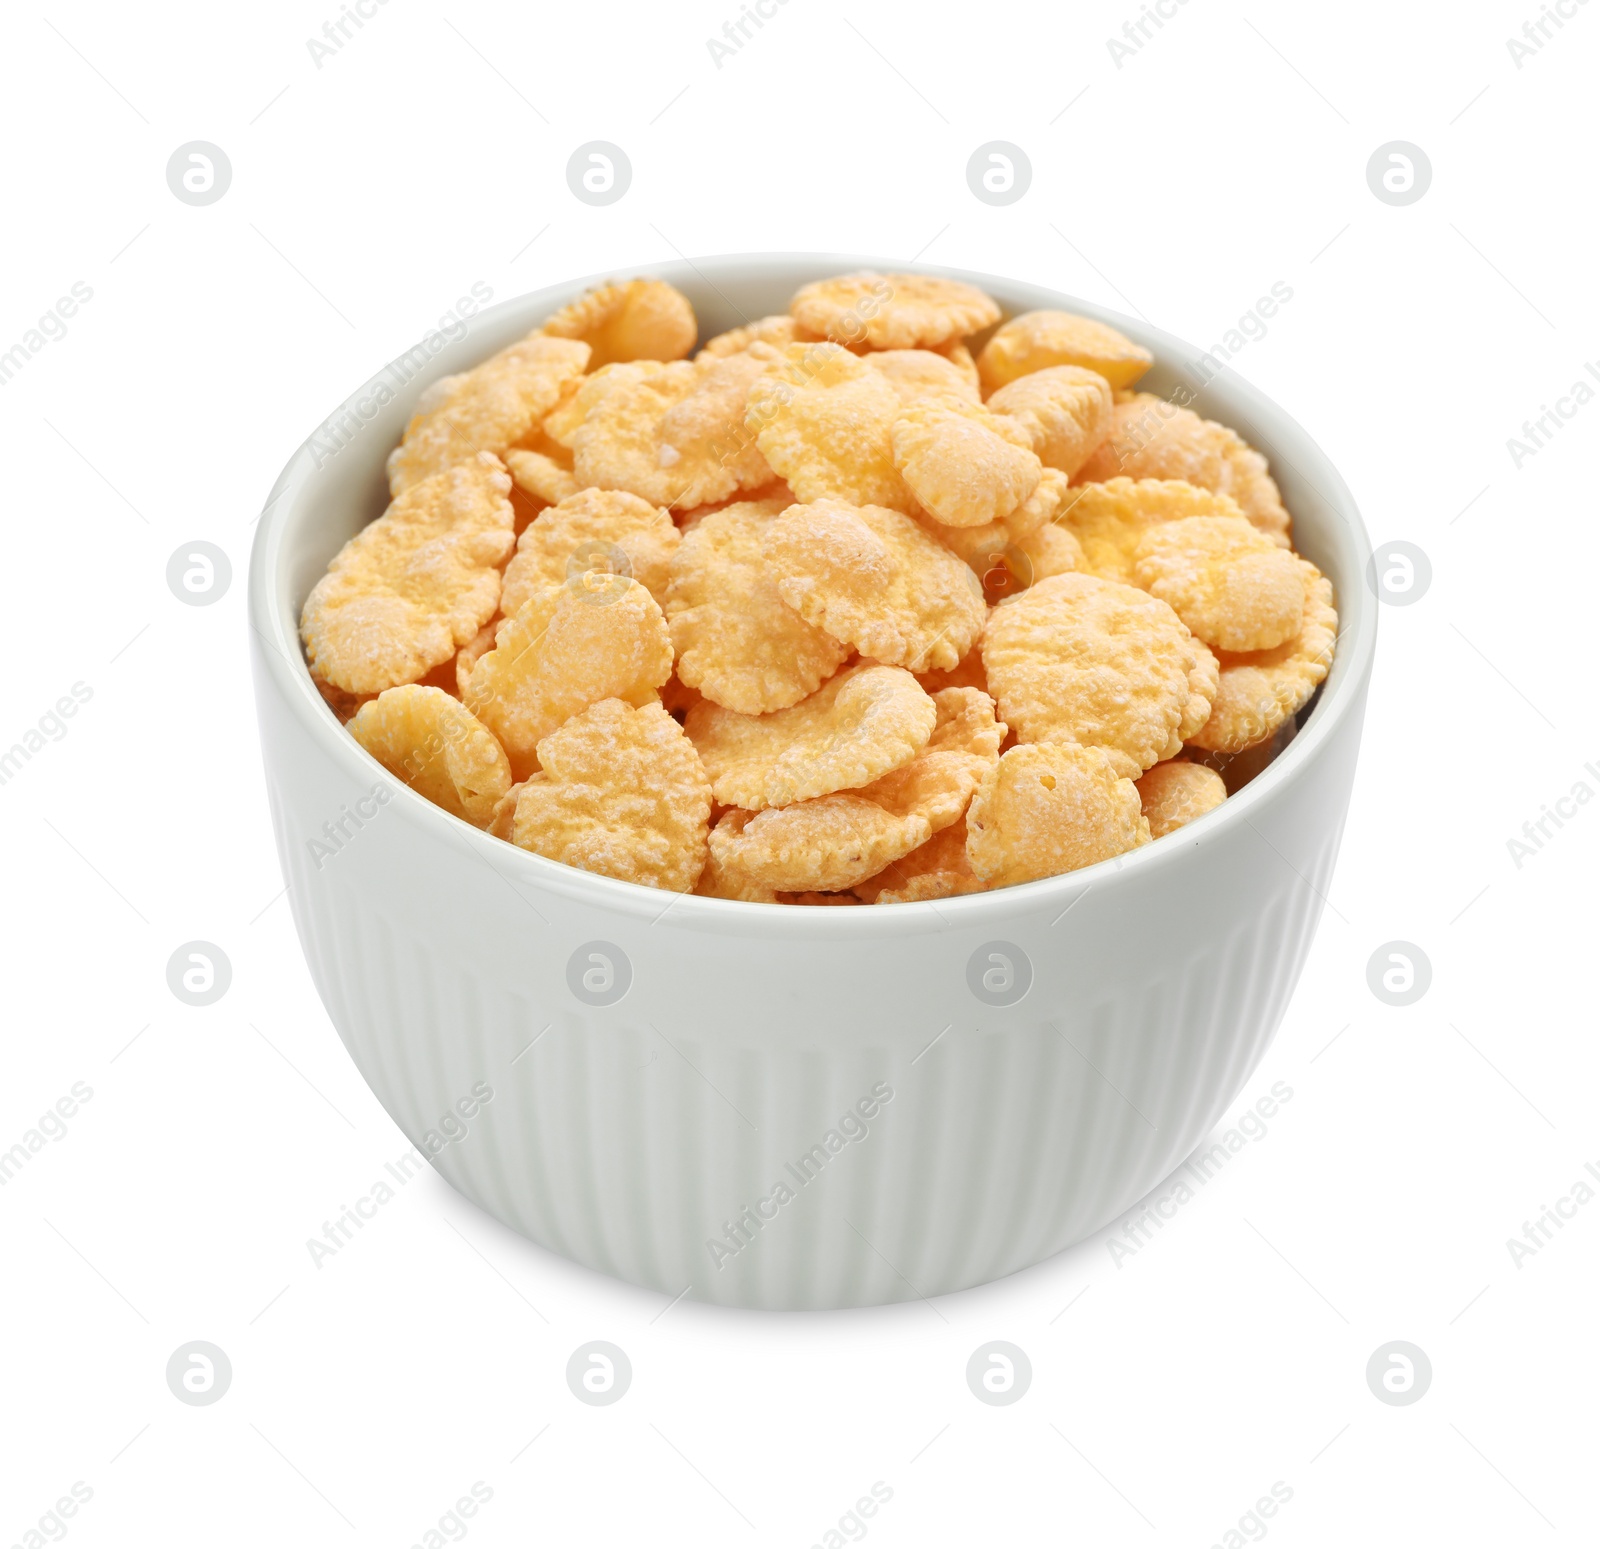 Photo of Bowl of tasty corn flakes isolated on white